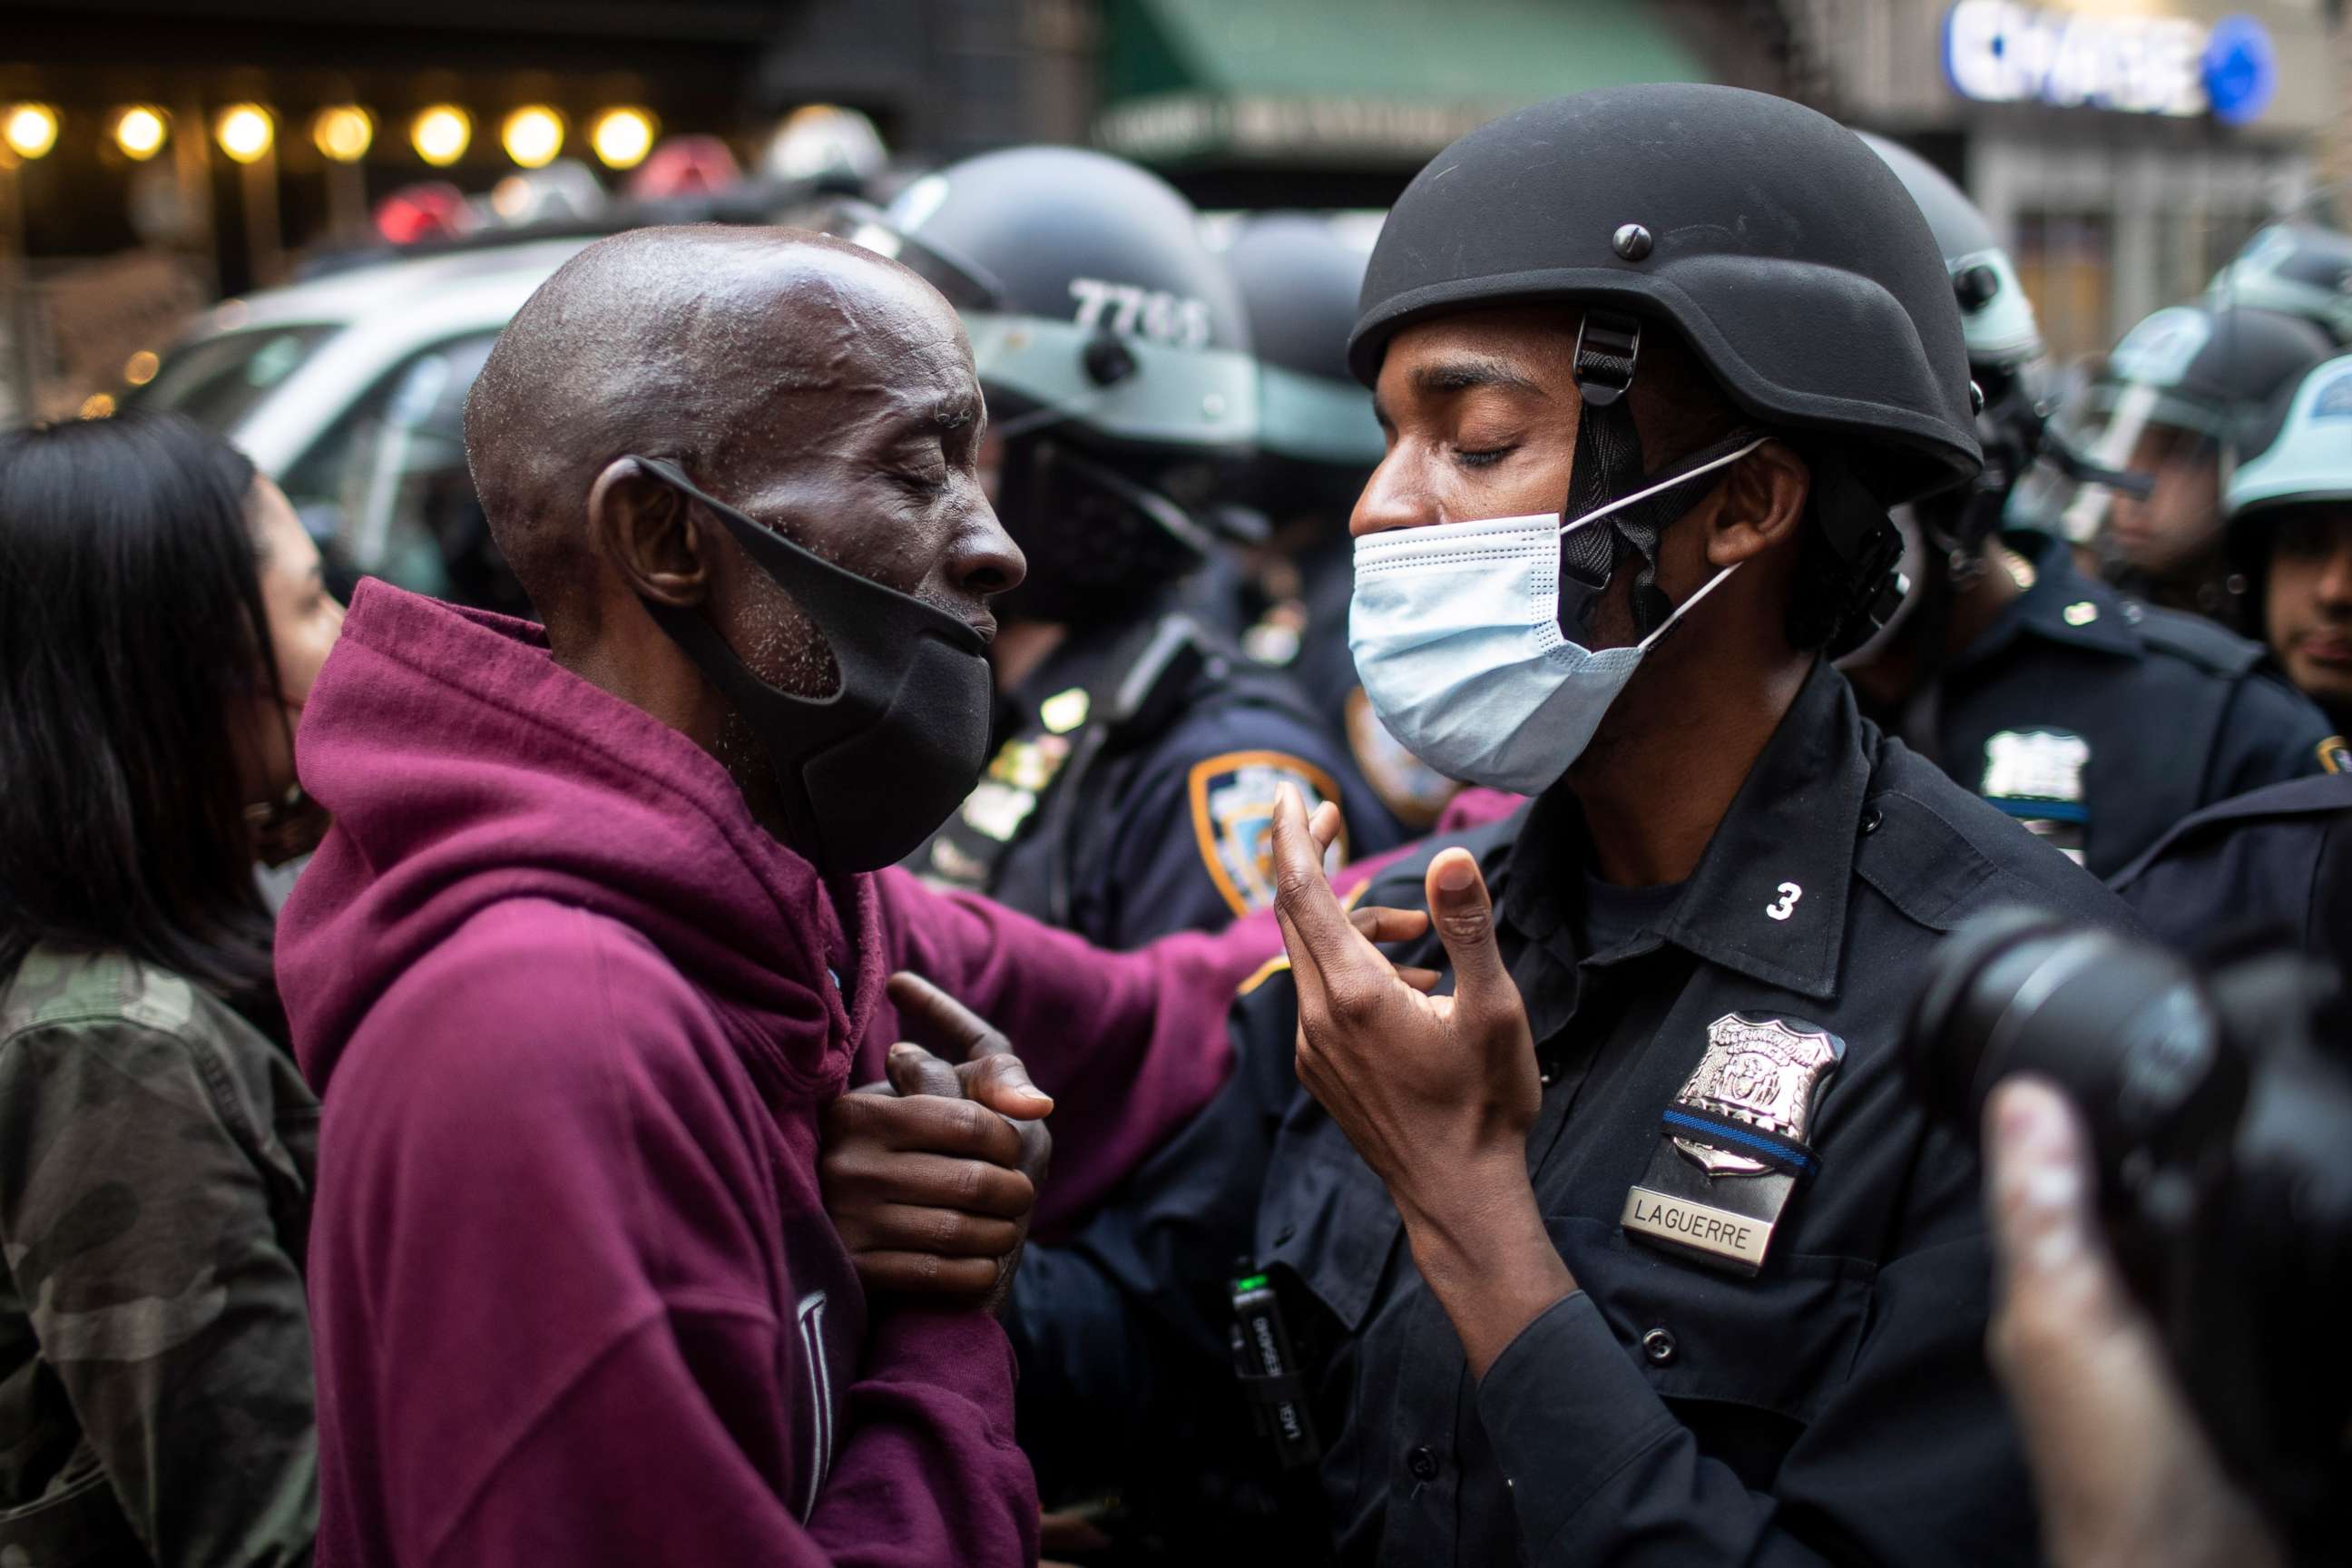 PHOTO: A protester and an officer shake hands in the middle of a standoff during a rally calling for justice over the death of George Floyd Tuesday, June 2, 2020, in New York. Floyd died after being restrained by Minneapolis police officers on May 25.